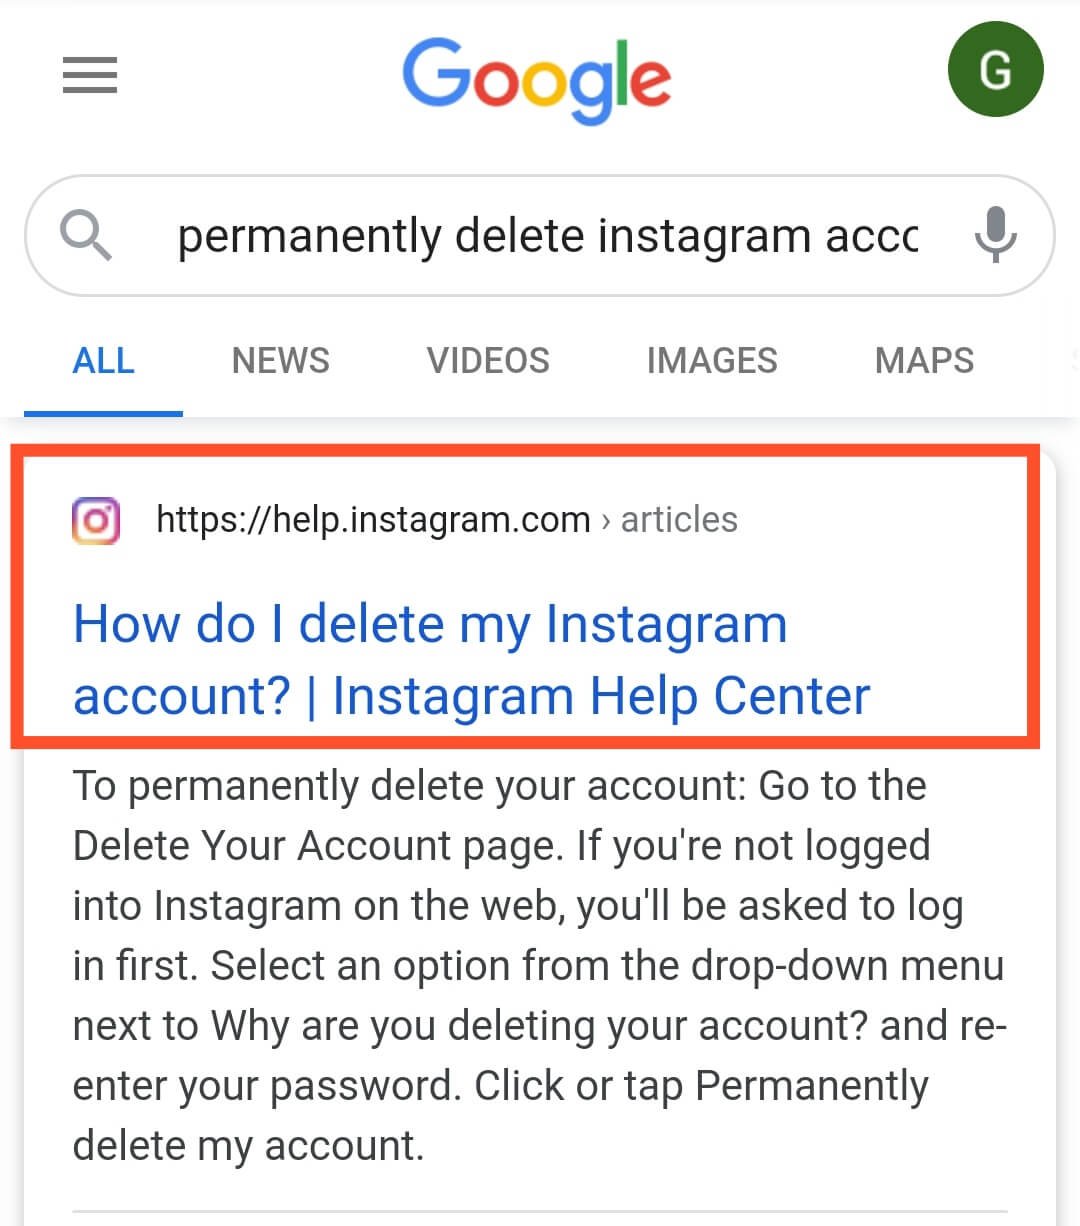 Step-by-Step Guide: How To Permanently Delete Your Instagram Account